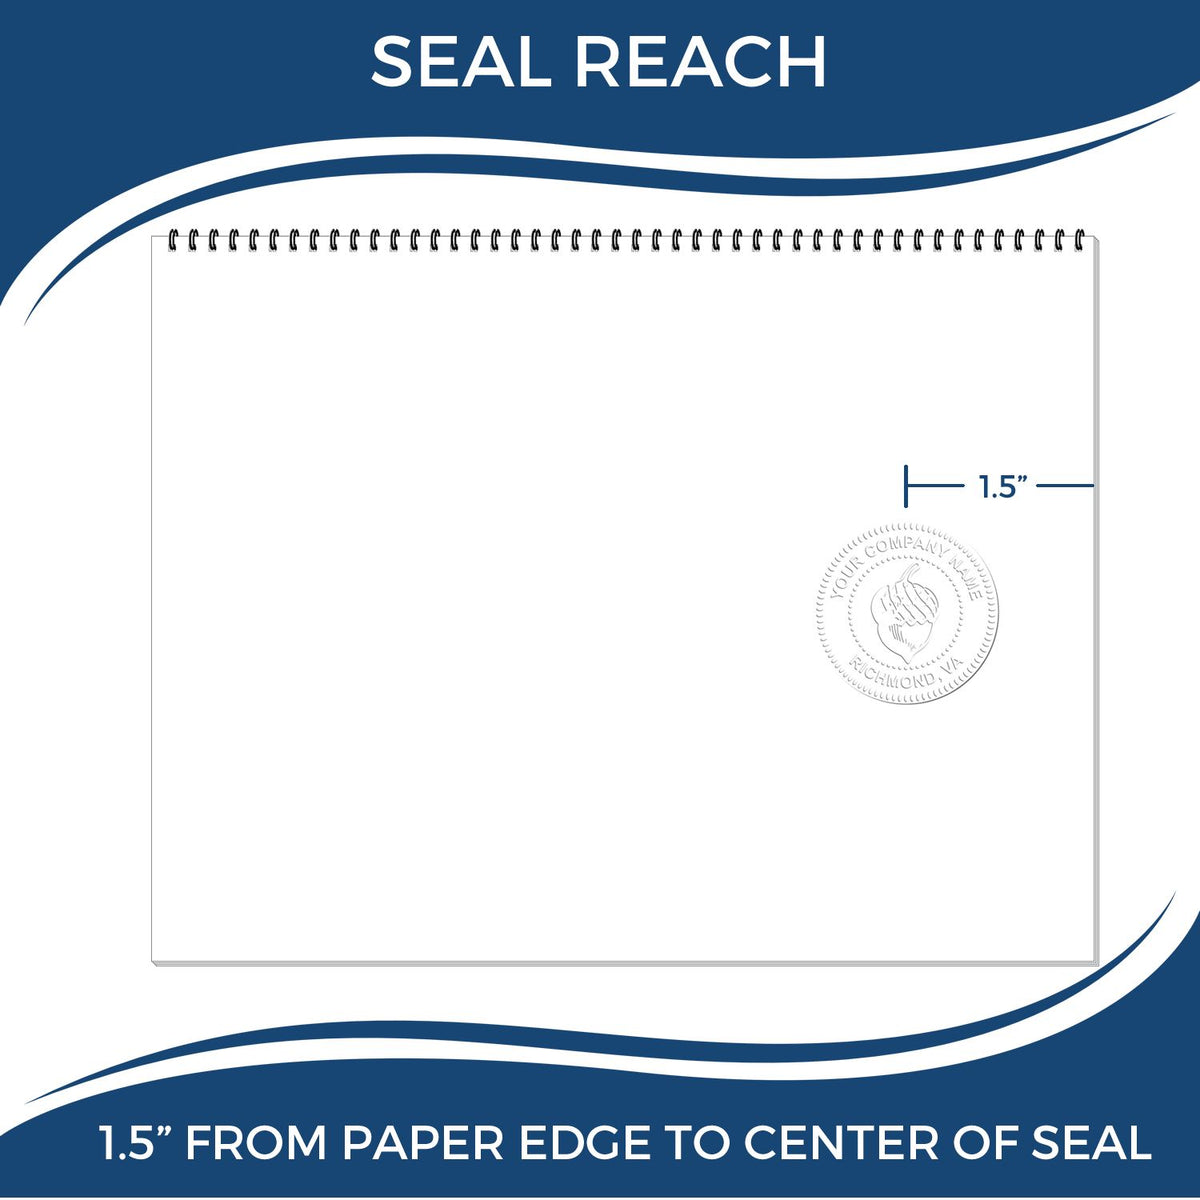 An infographic showing the seal reach which is represented by a ruler and a miniature seal image of the Massachusetts Engineer Desk Seal